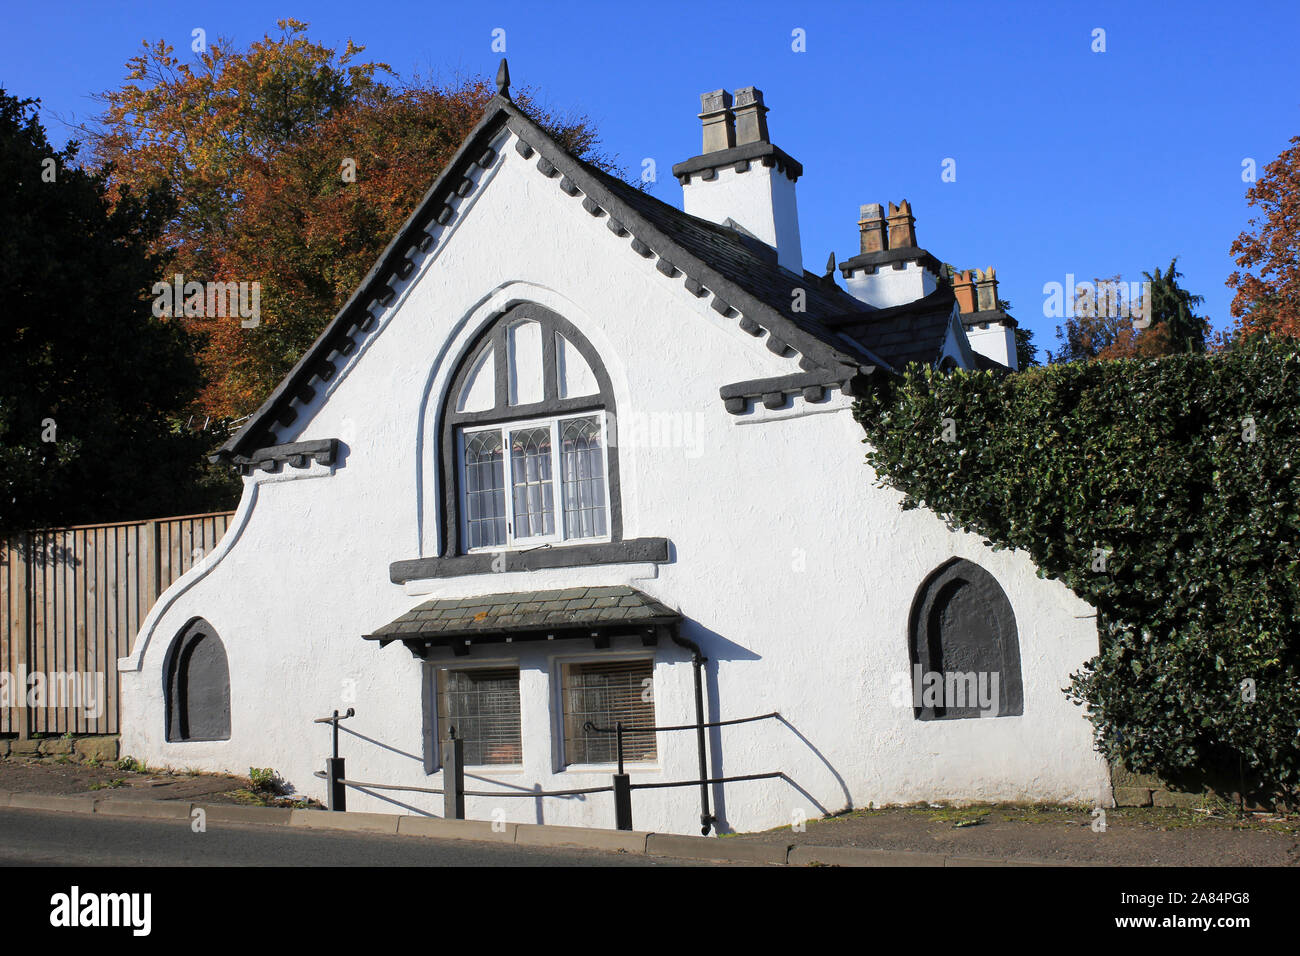 Gothic revival cottages, built as part of the former Trevalyn Hall estates in the village of Marford, Clwyd, Wrexham, Wales Stock Photo